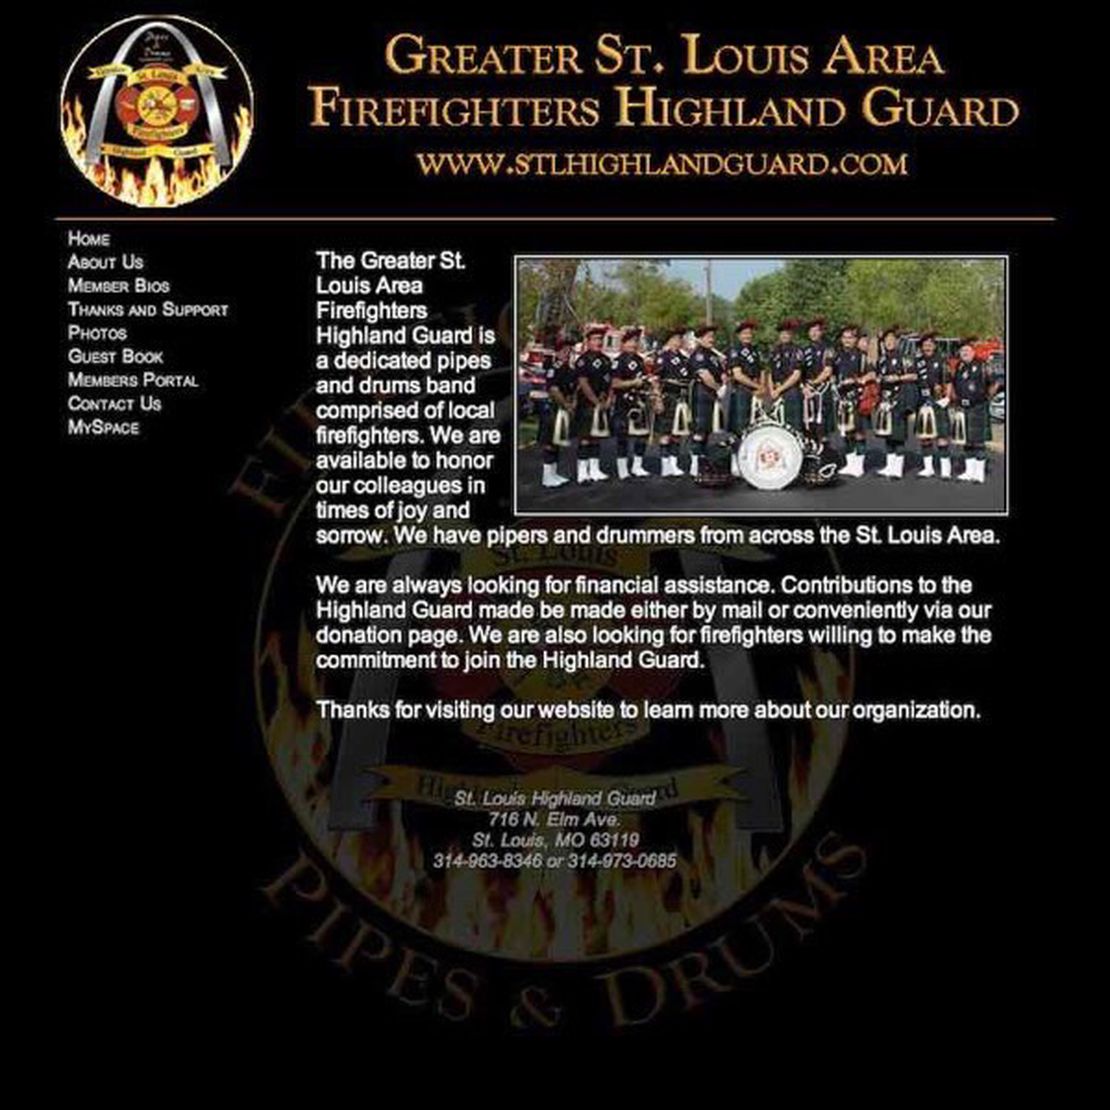 greater st. louis area firefighters highland guard